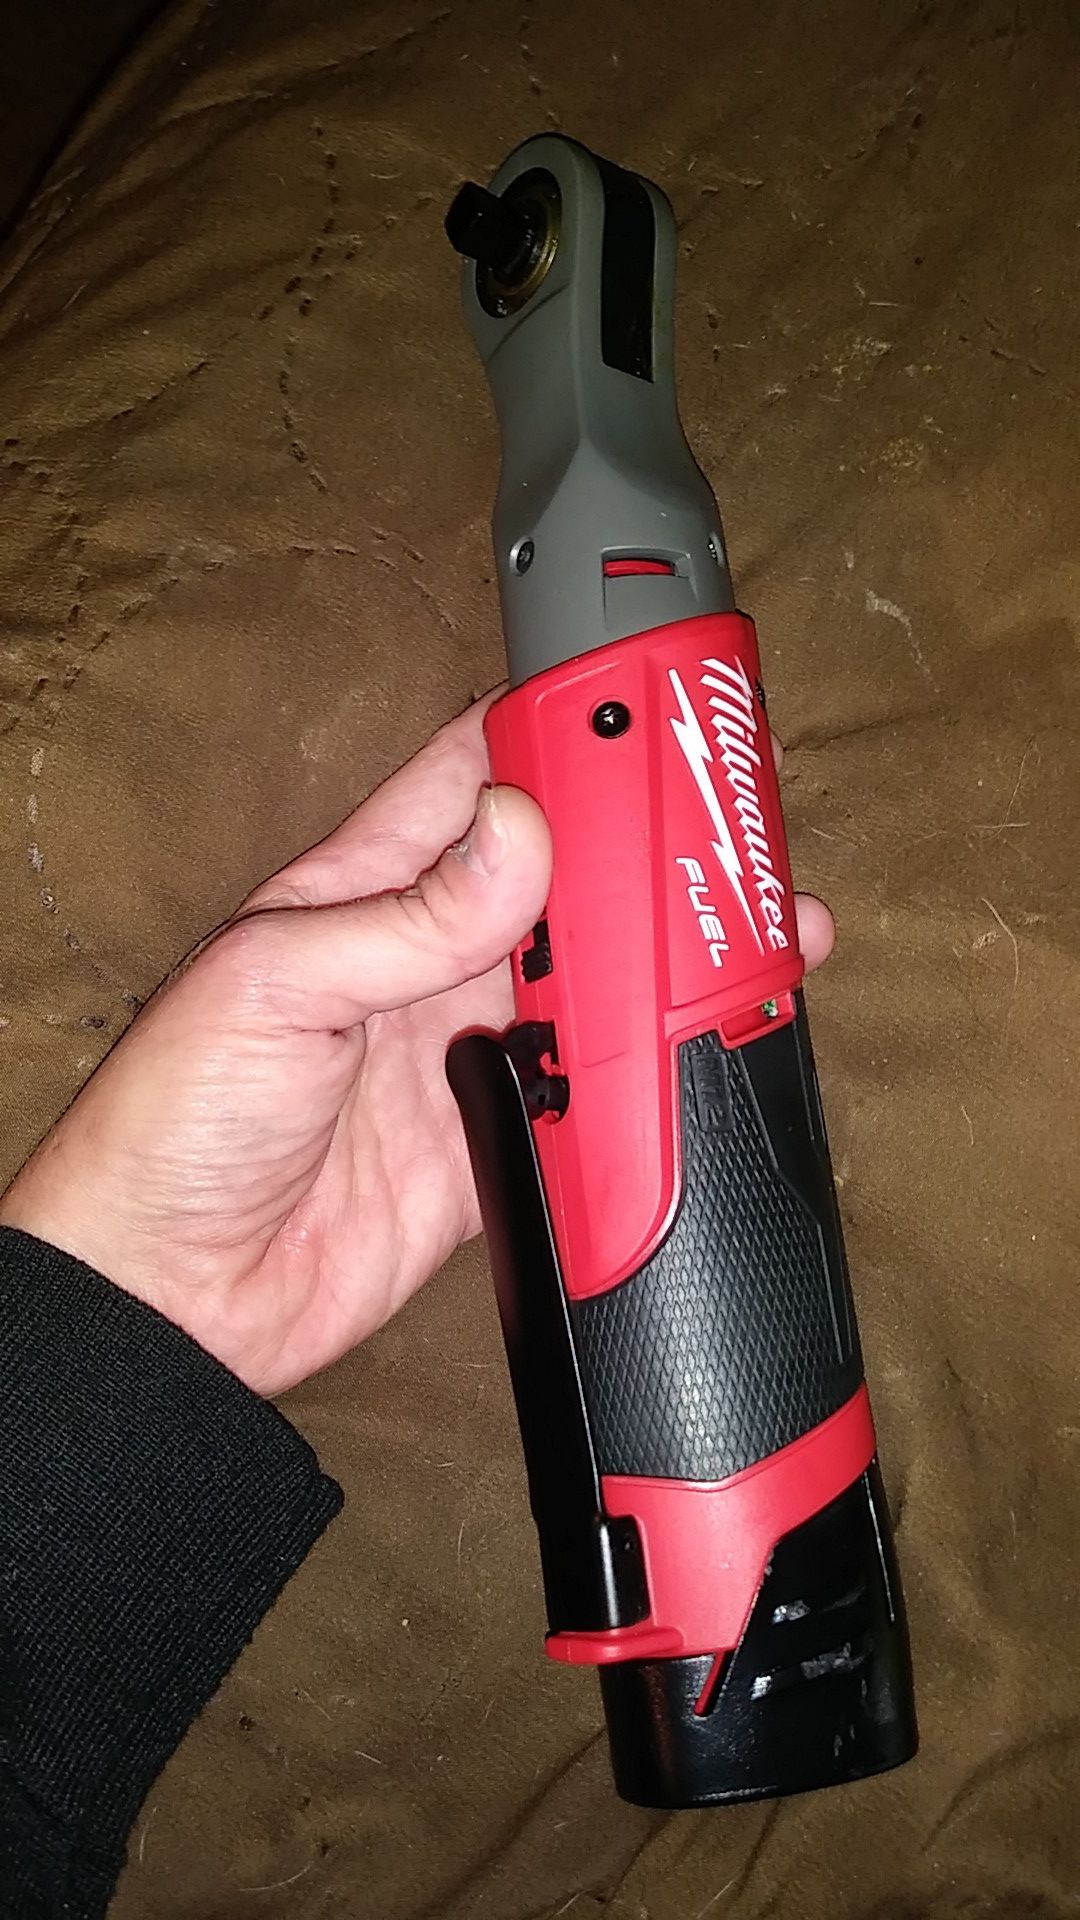 Milwaukee 3/8th's Fuel battery powered Ratchet